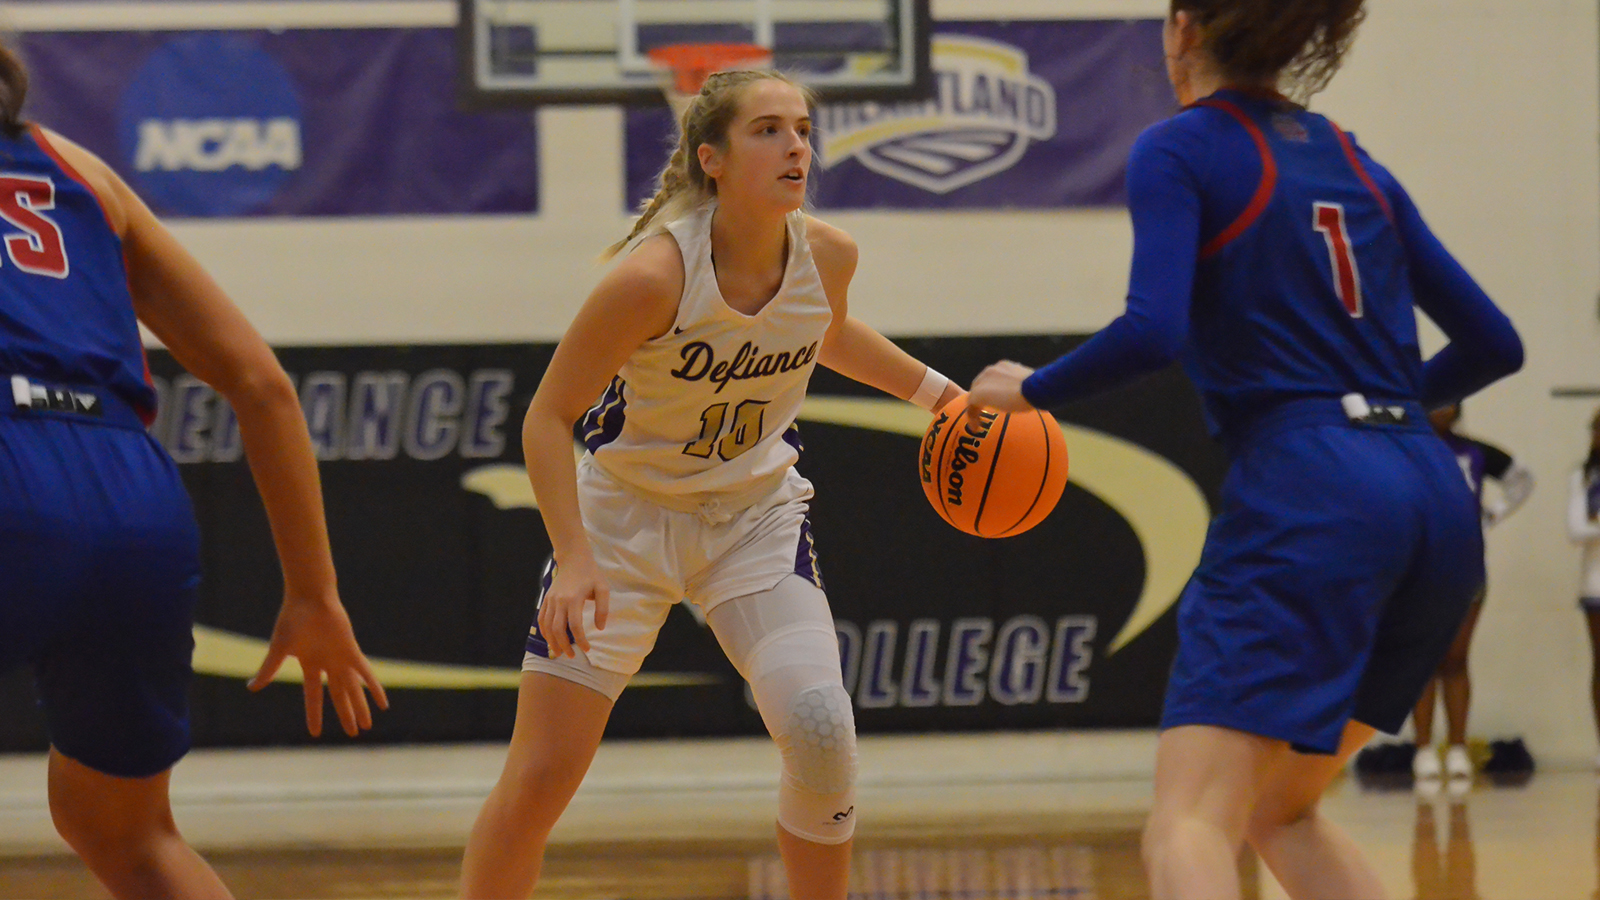 WBB Preview: Defiance back home to take on Anderson